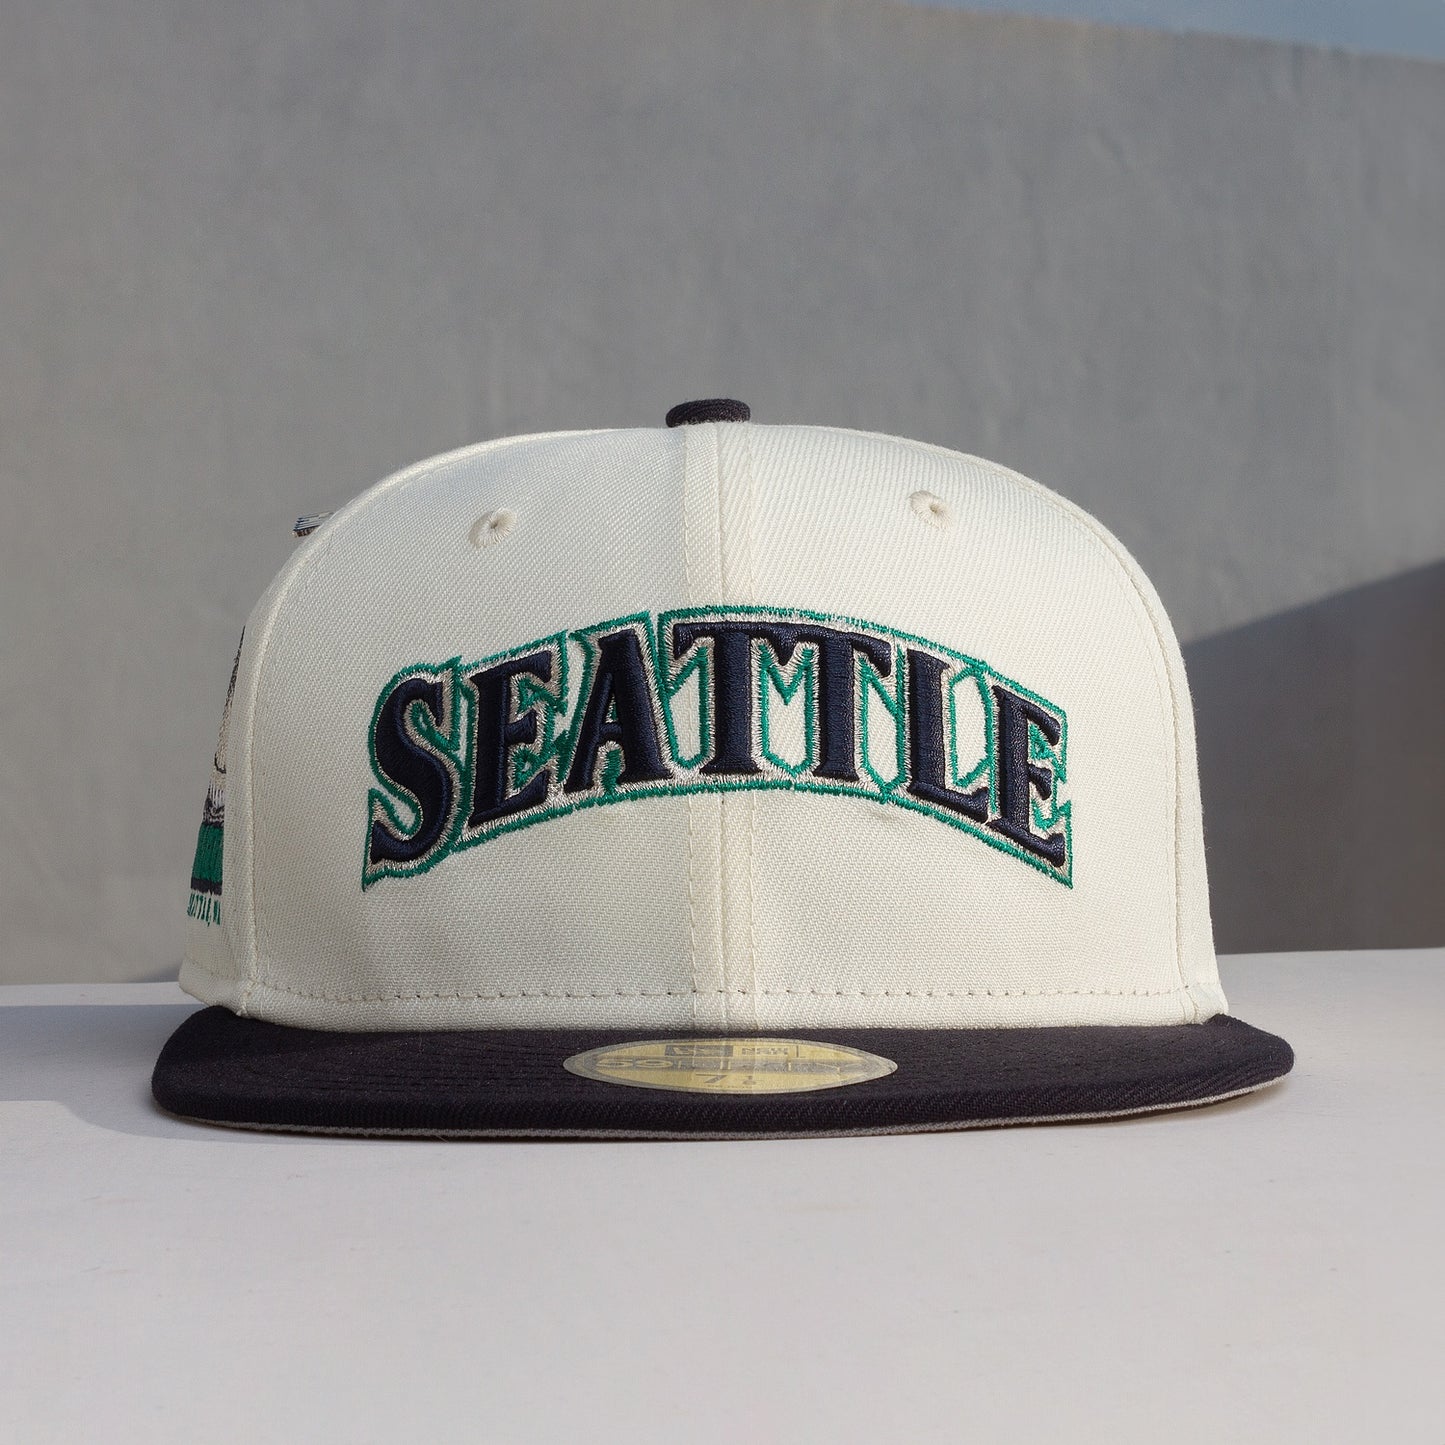 NEW ERA 59FIFTY MLB SEATTLE MARINERS KINGDOME PATCH TWO TONE / GREY UV FITTED CAP